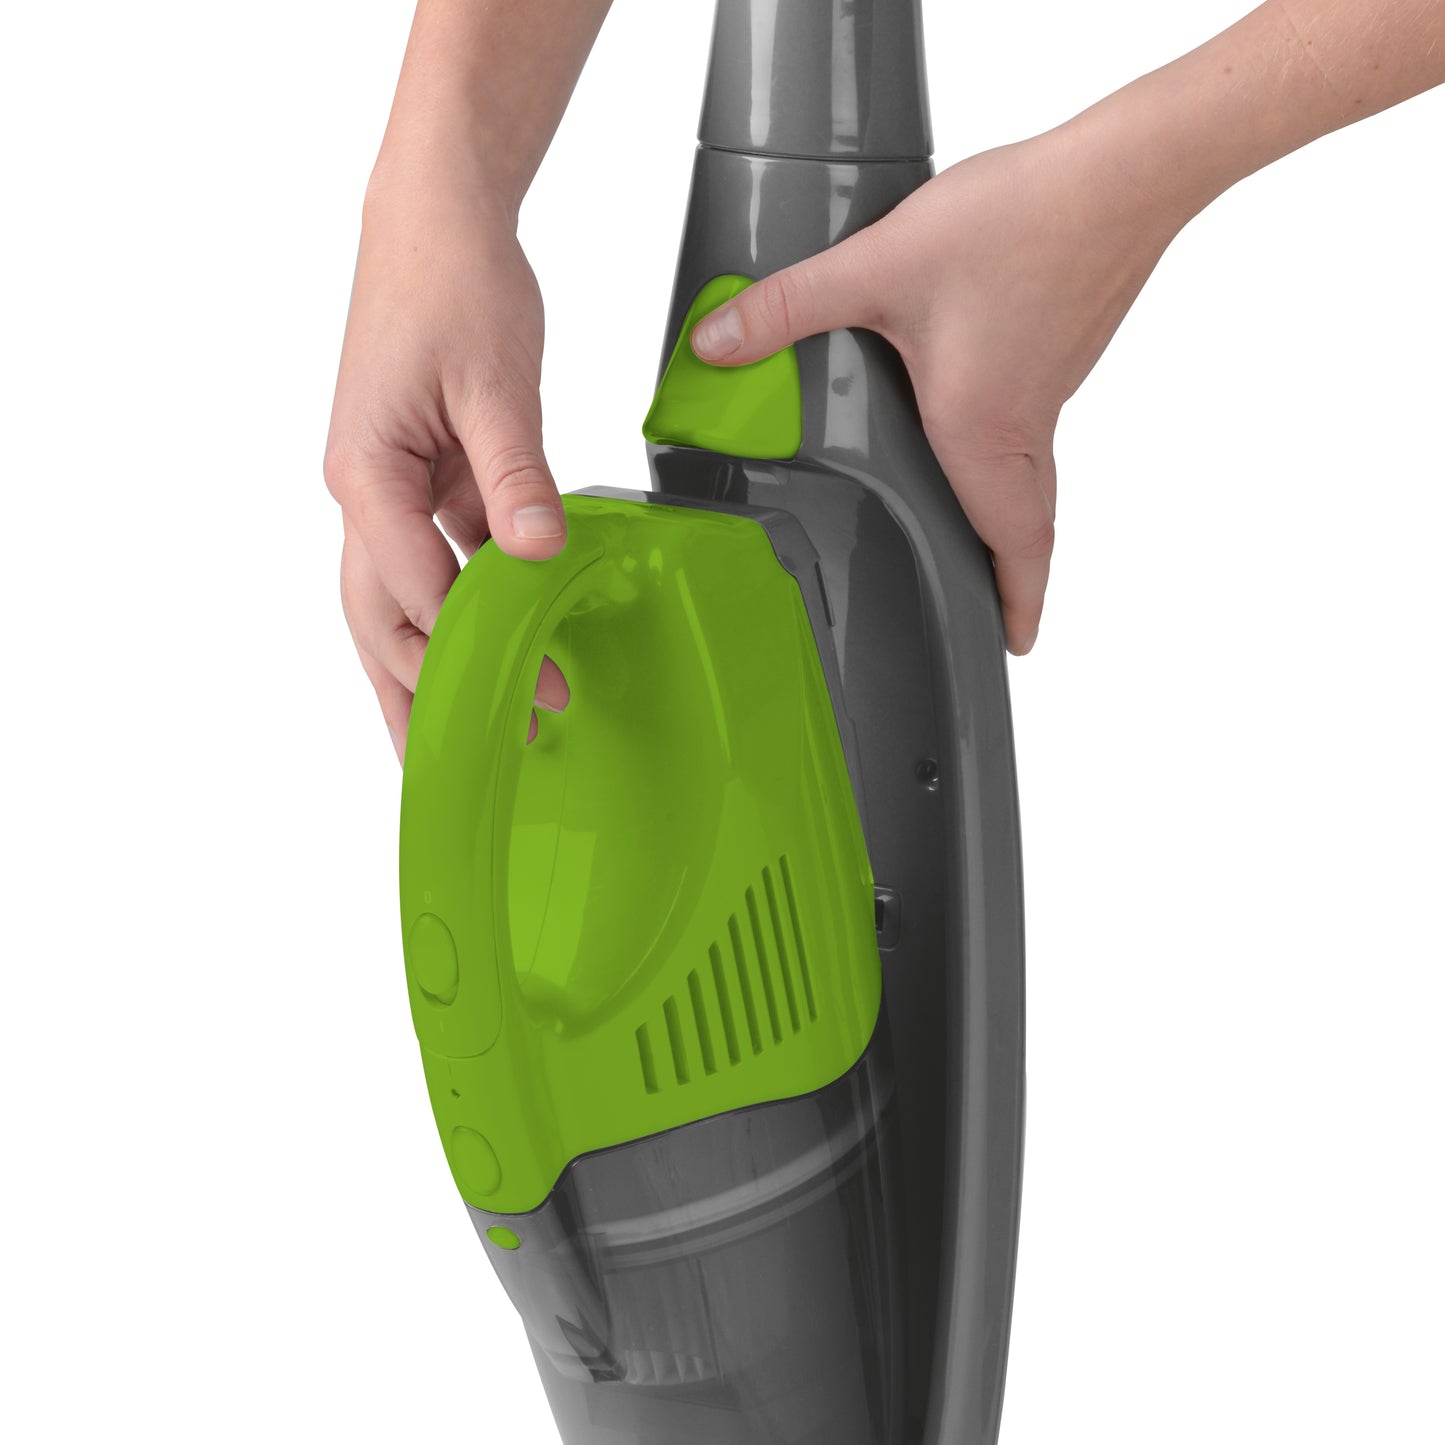 Montiss CVC641 Chicago - Cordless, rechargeable 2-in-1 Vacuum Cleaner with wet and dry functions - Light green